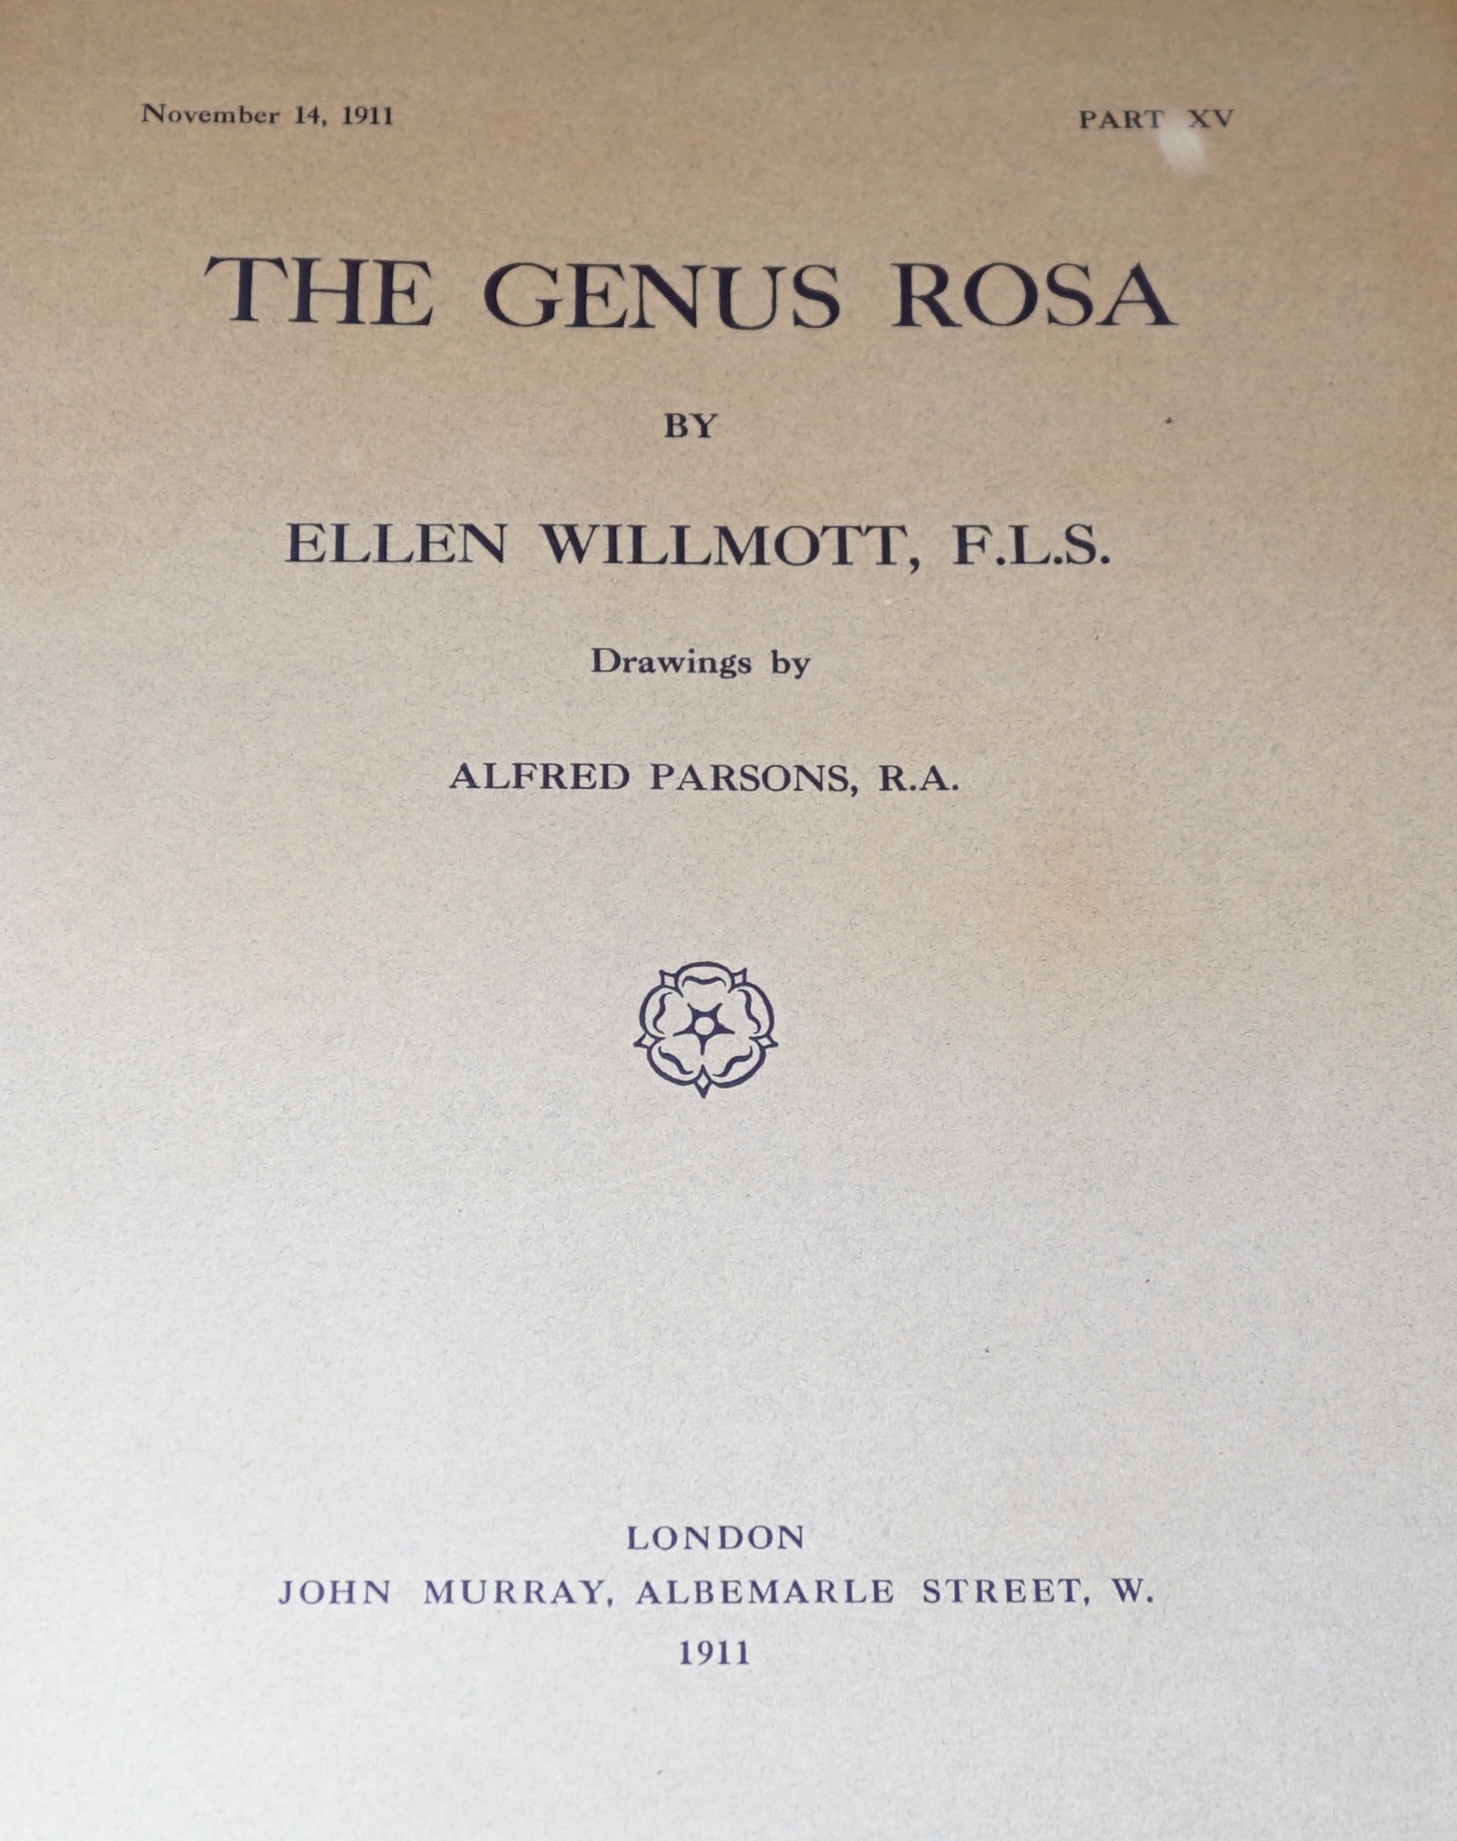 Willmott, Ellen - The Genus Rosa, drawings by Alfred Parsons, 2 vols in 25 original parts, with 125 (70 and 55) only, of 132 chromolithograph plates, tissue guards, numerous uncoloured plates and illustrations to text, i